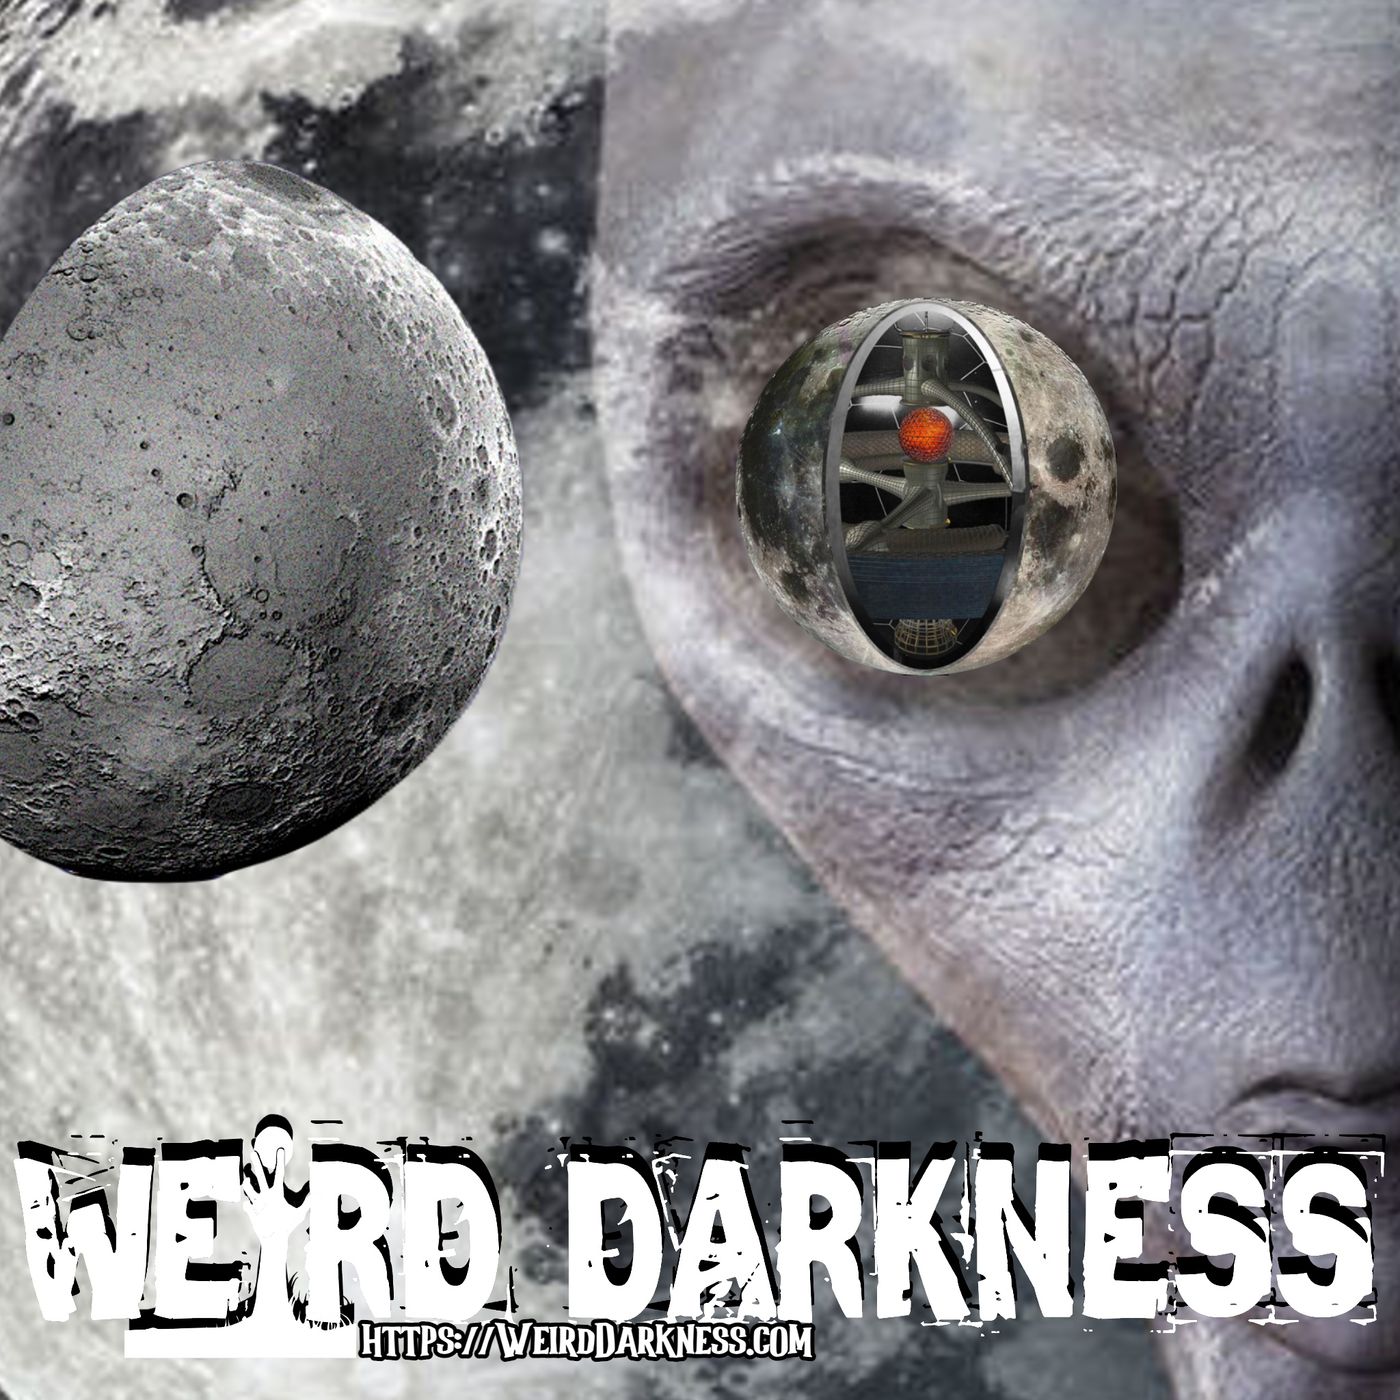 “COULD OUR MOON BE AN ALIEN SPACESHIP?” and More Creepy True Tales! #WeirdDarkness